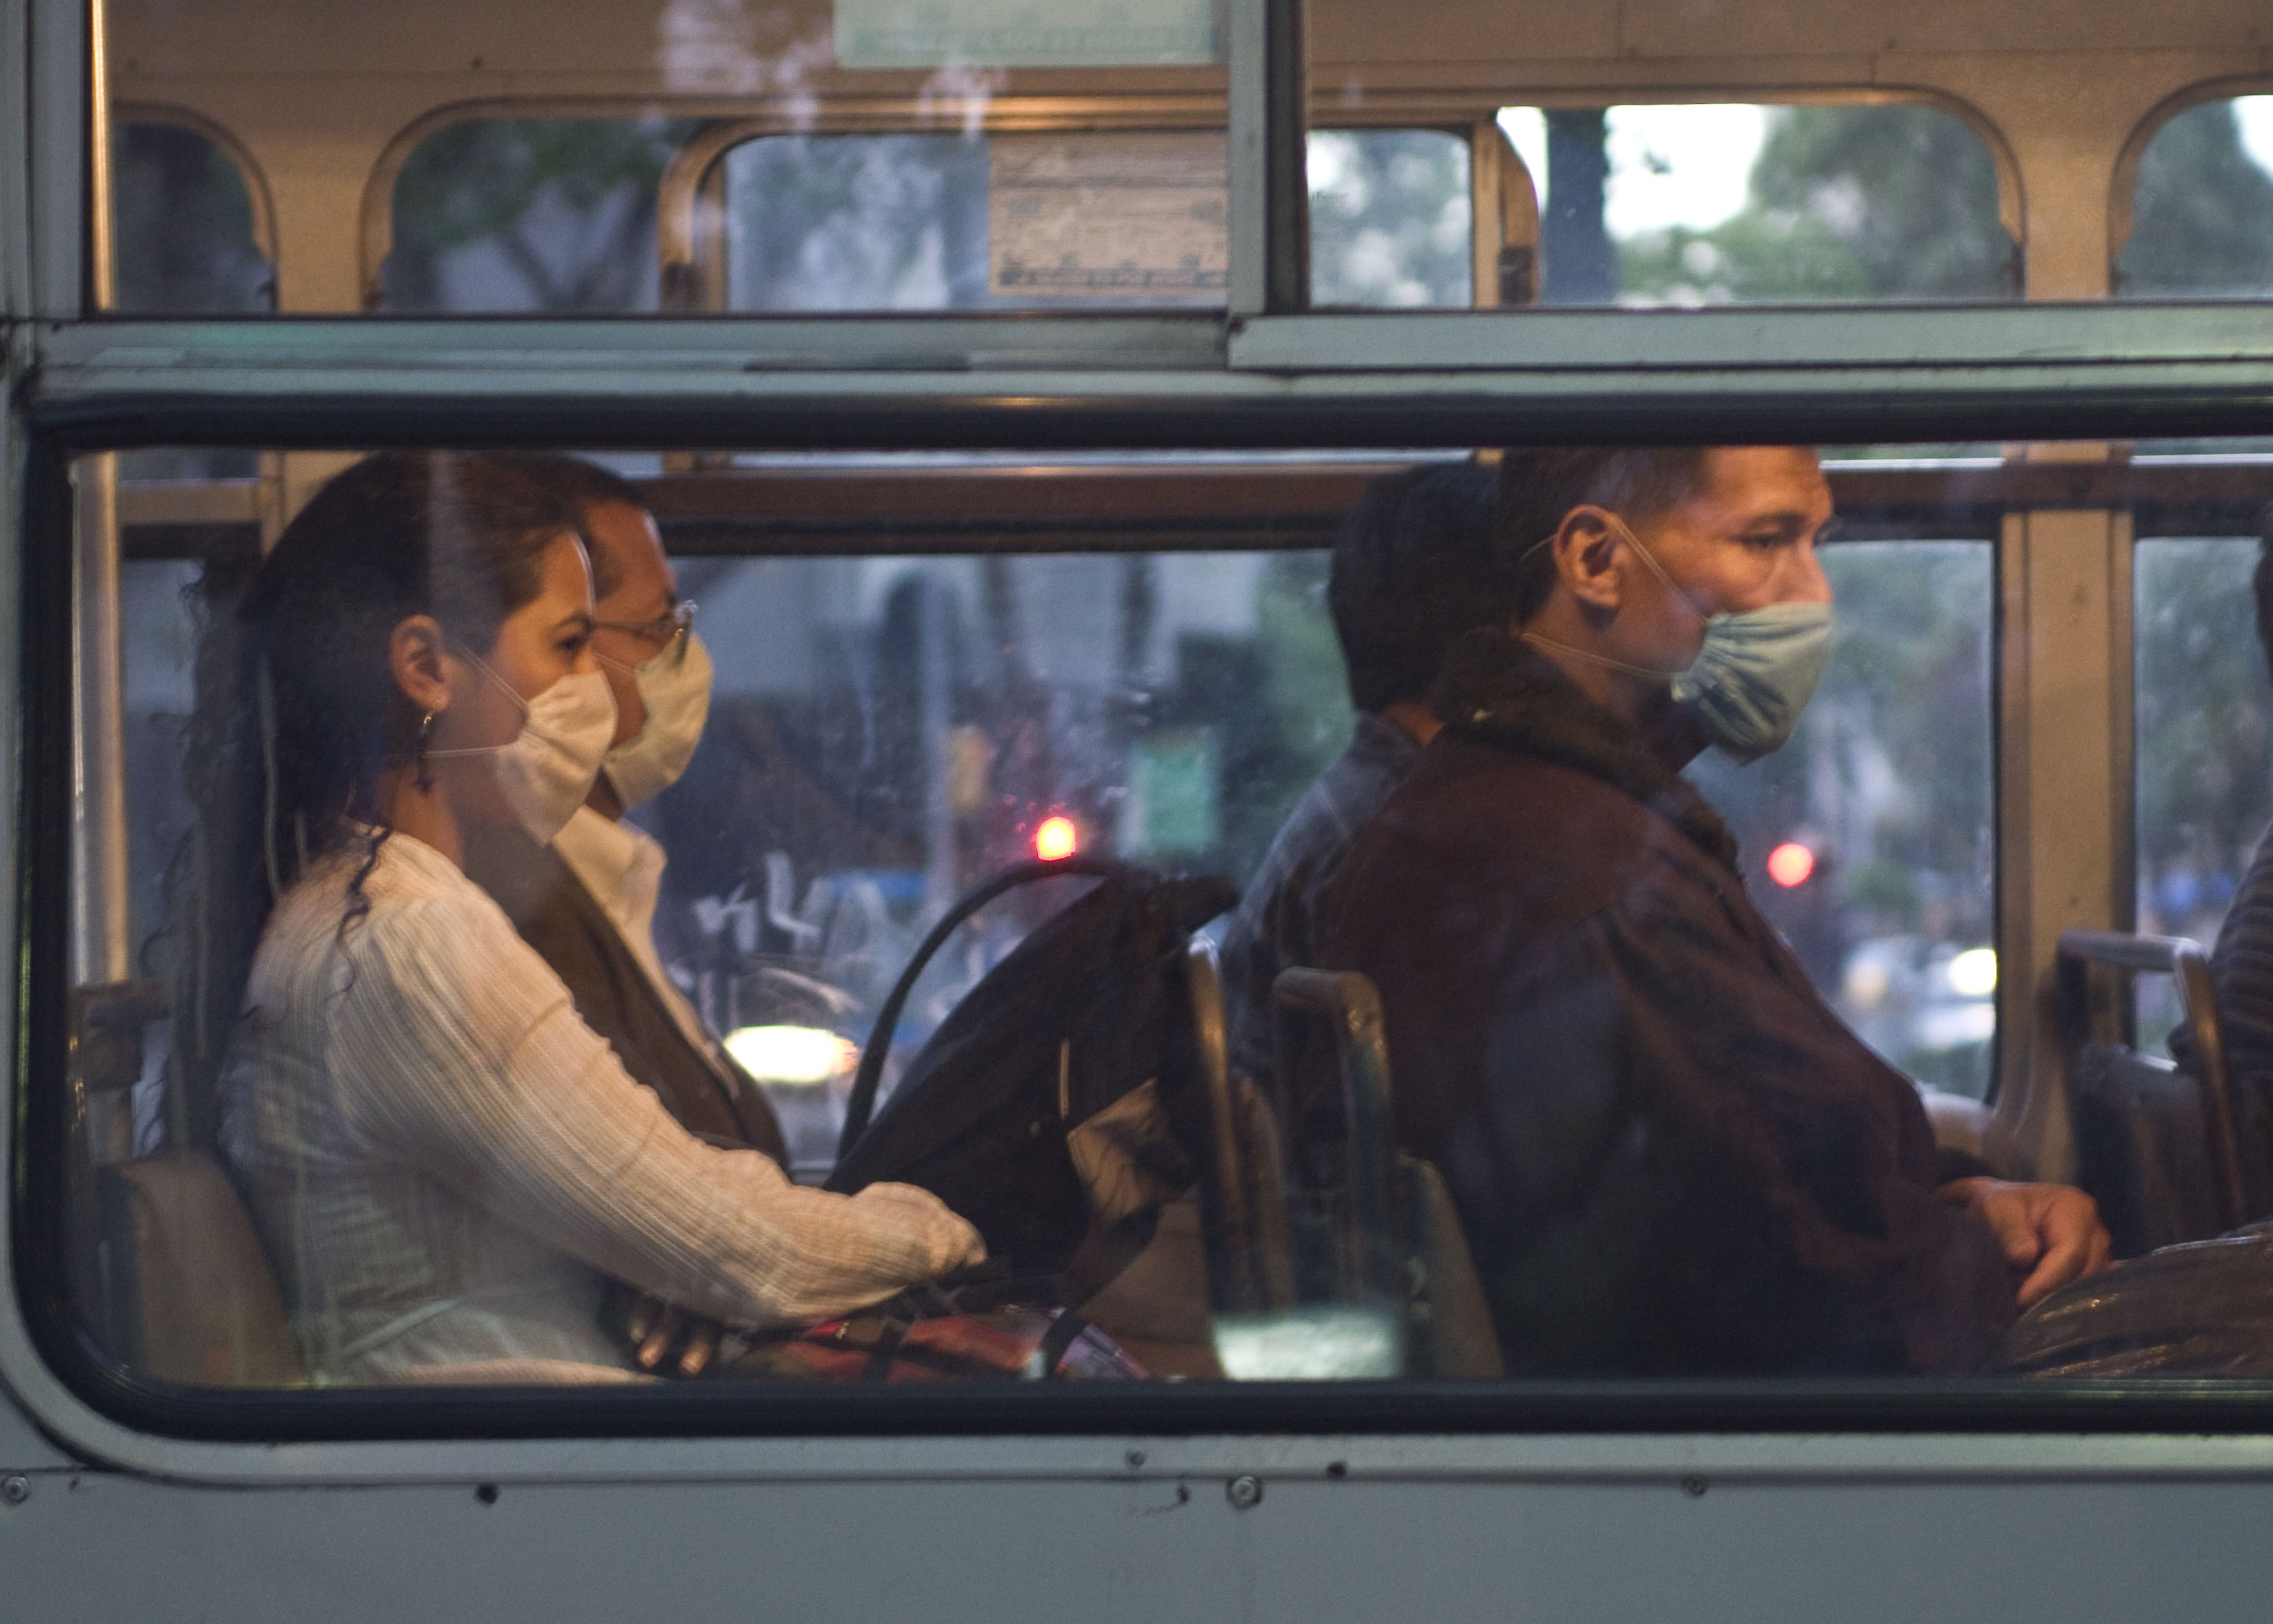 Passengers on a bus wearing surgical masks